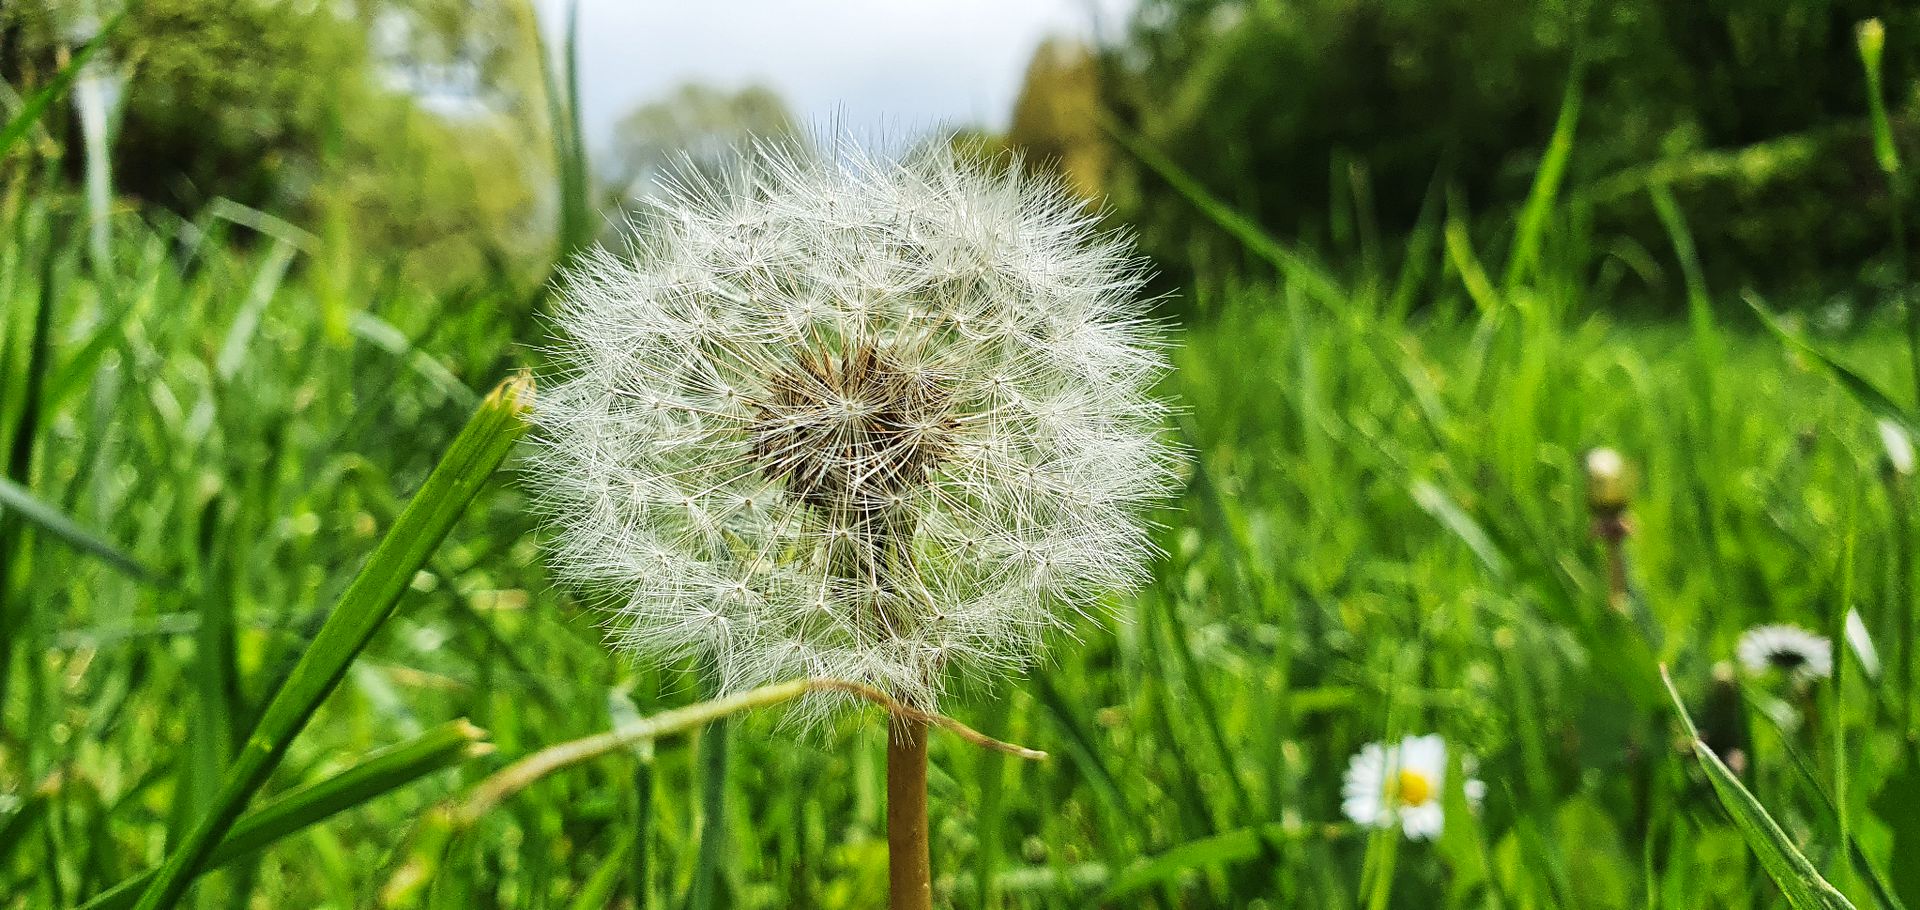 11th of May 2021. Dandelion.